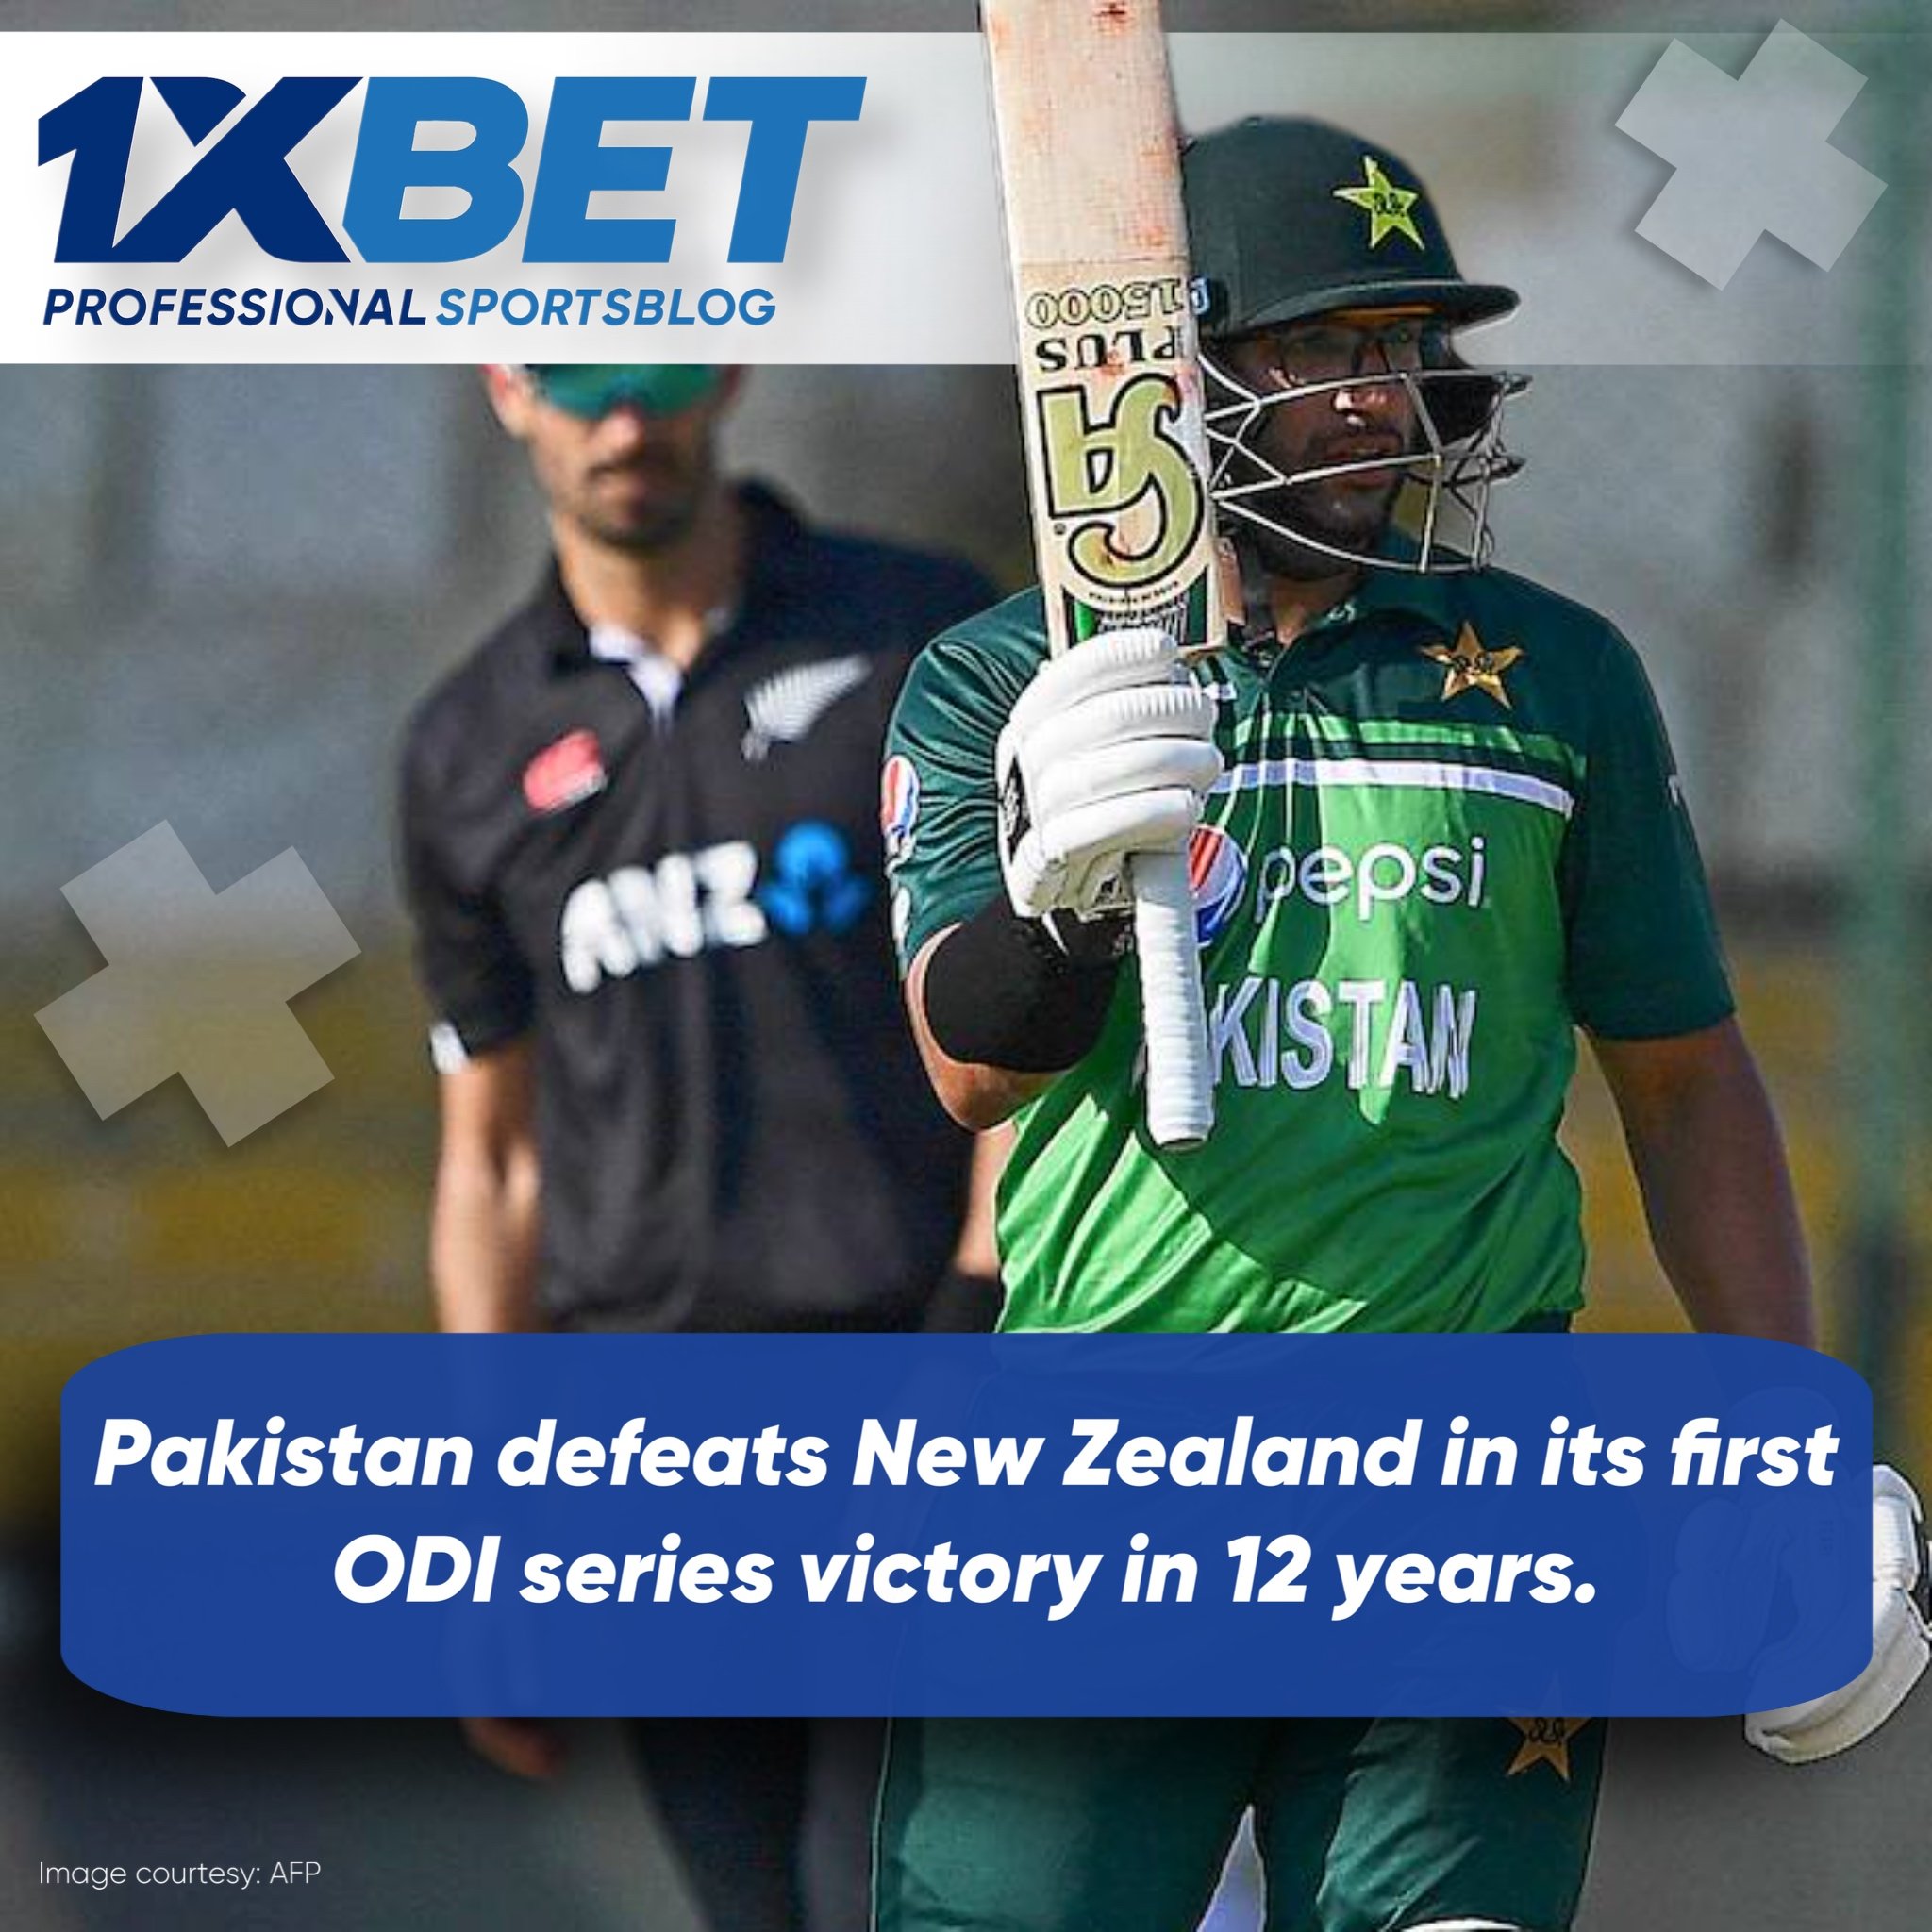 Pakistan defeats New Zealand in its first ODI series victory in 12 years